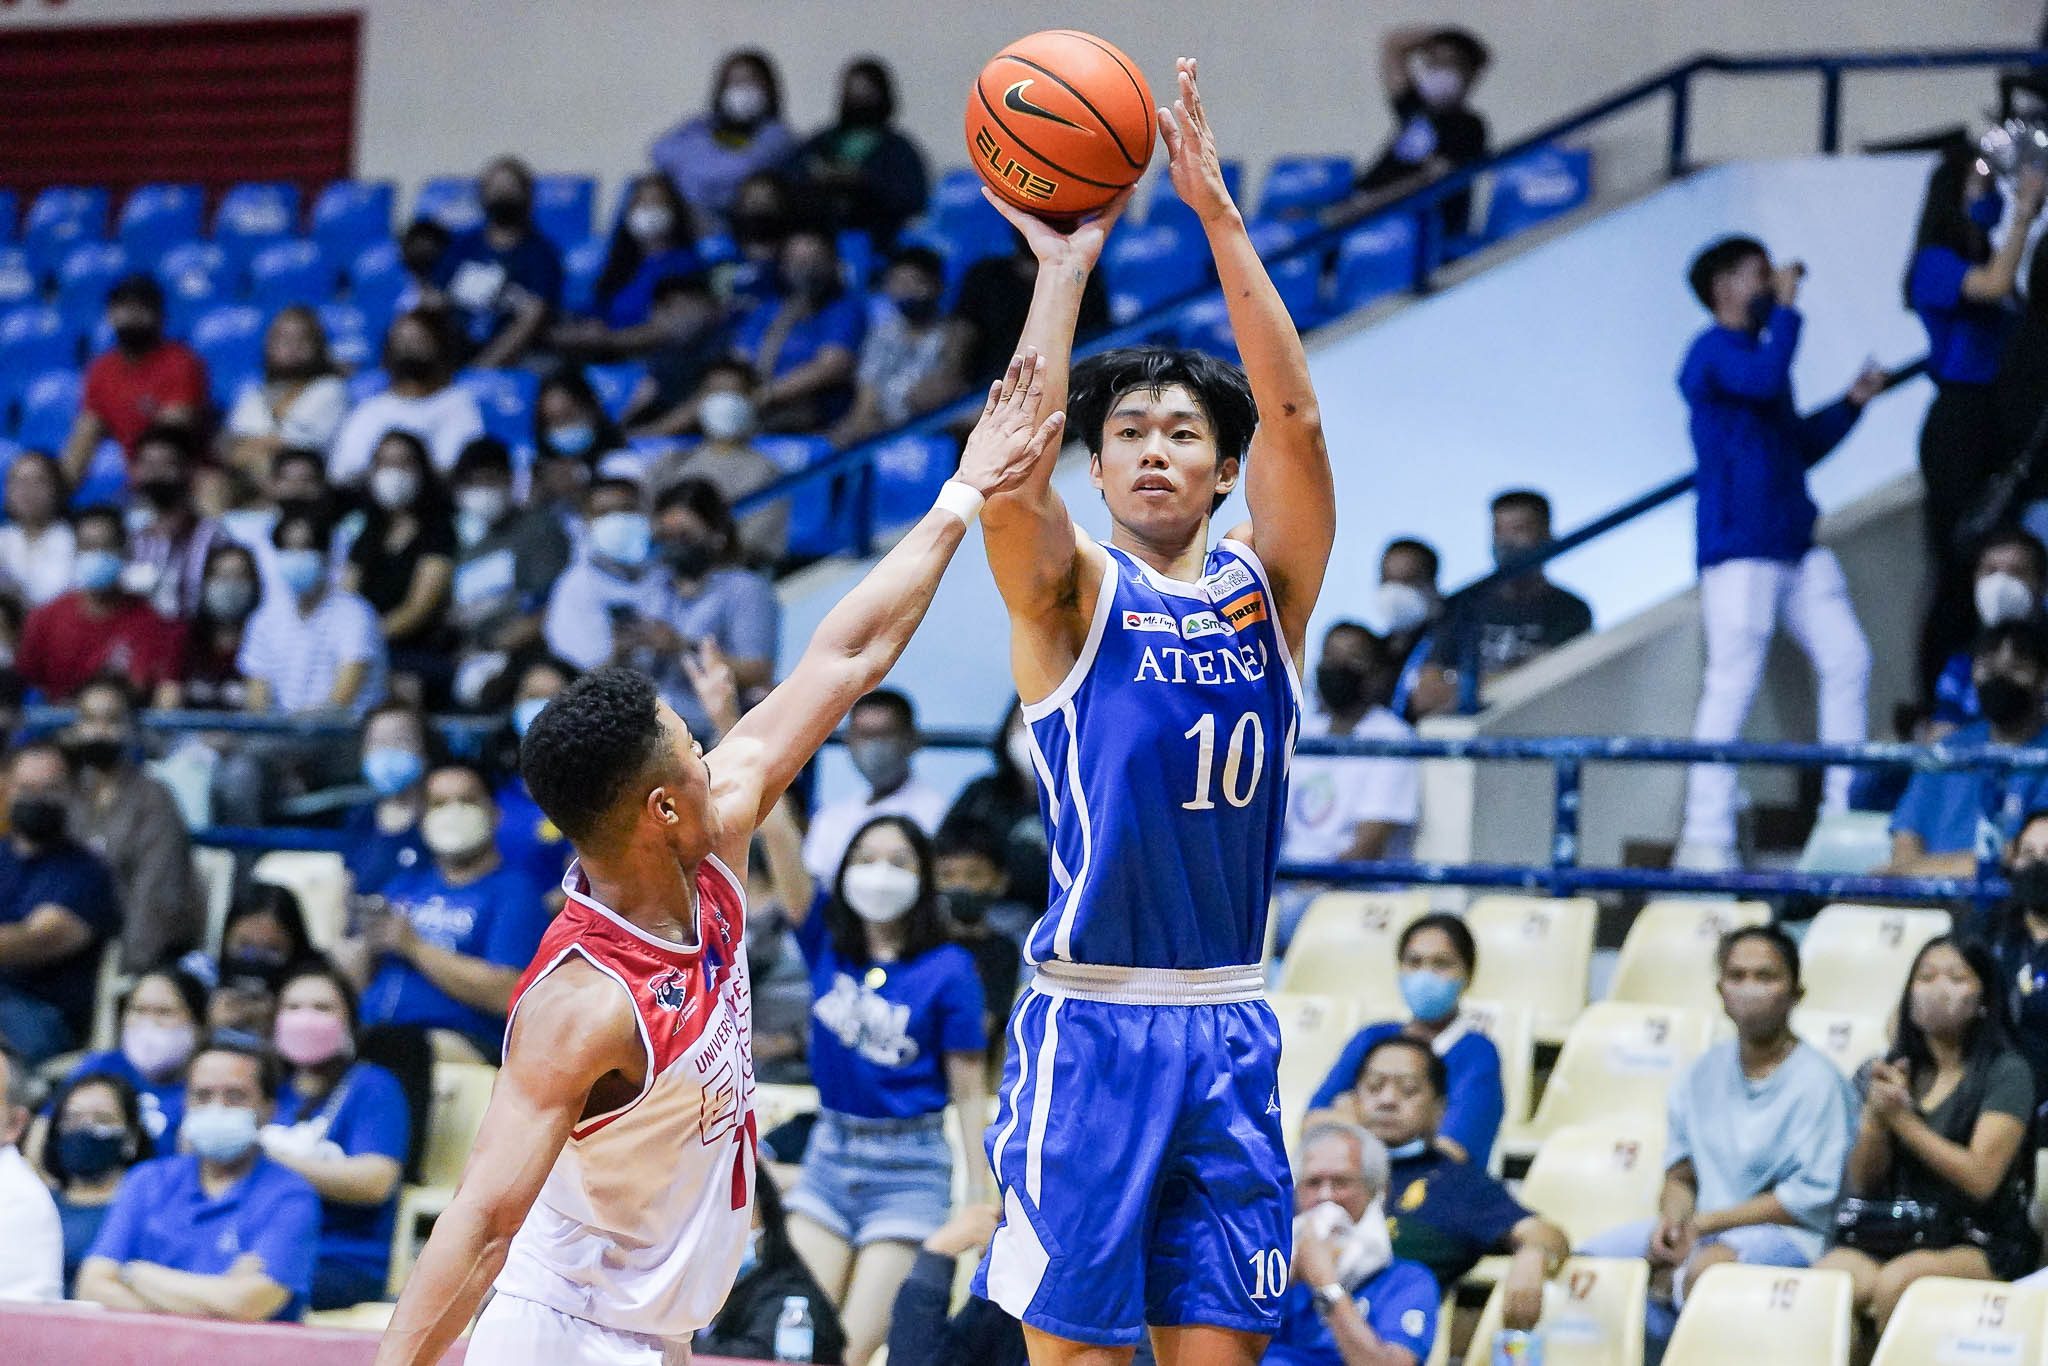 Ateneo flexes feared 3rd-quarter form, drubs UE for shot at 2nd place